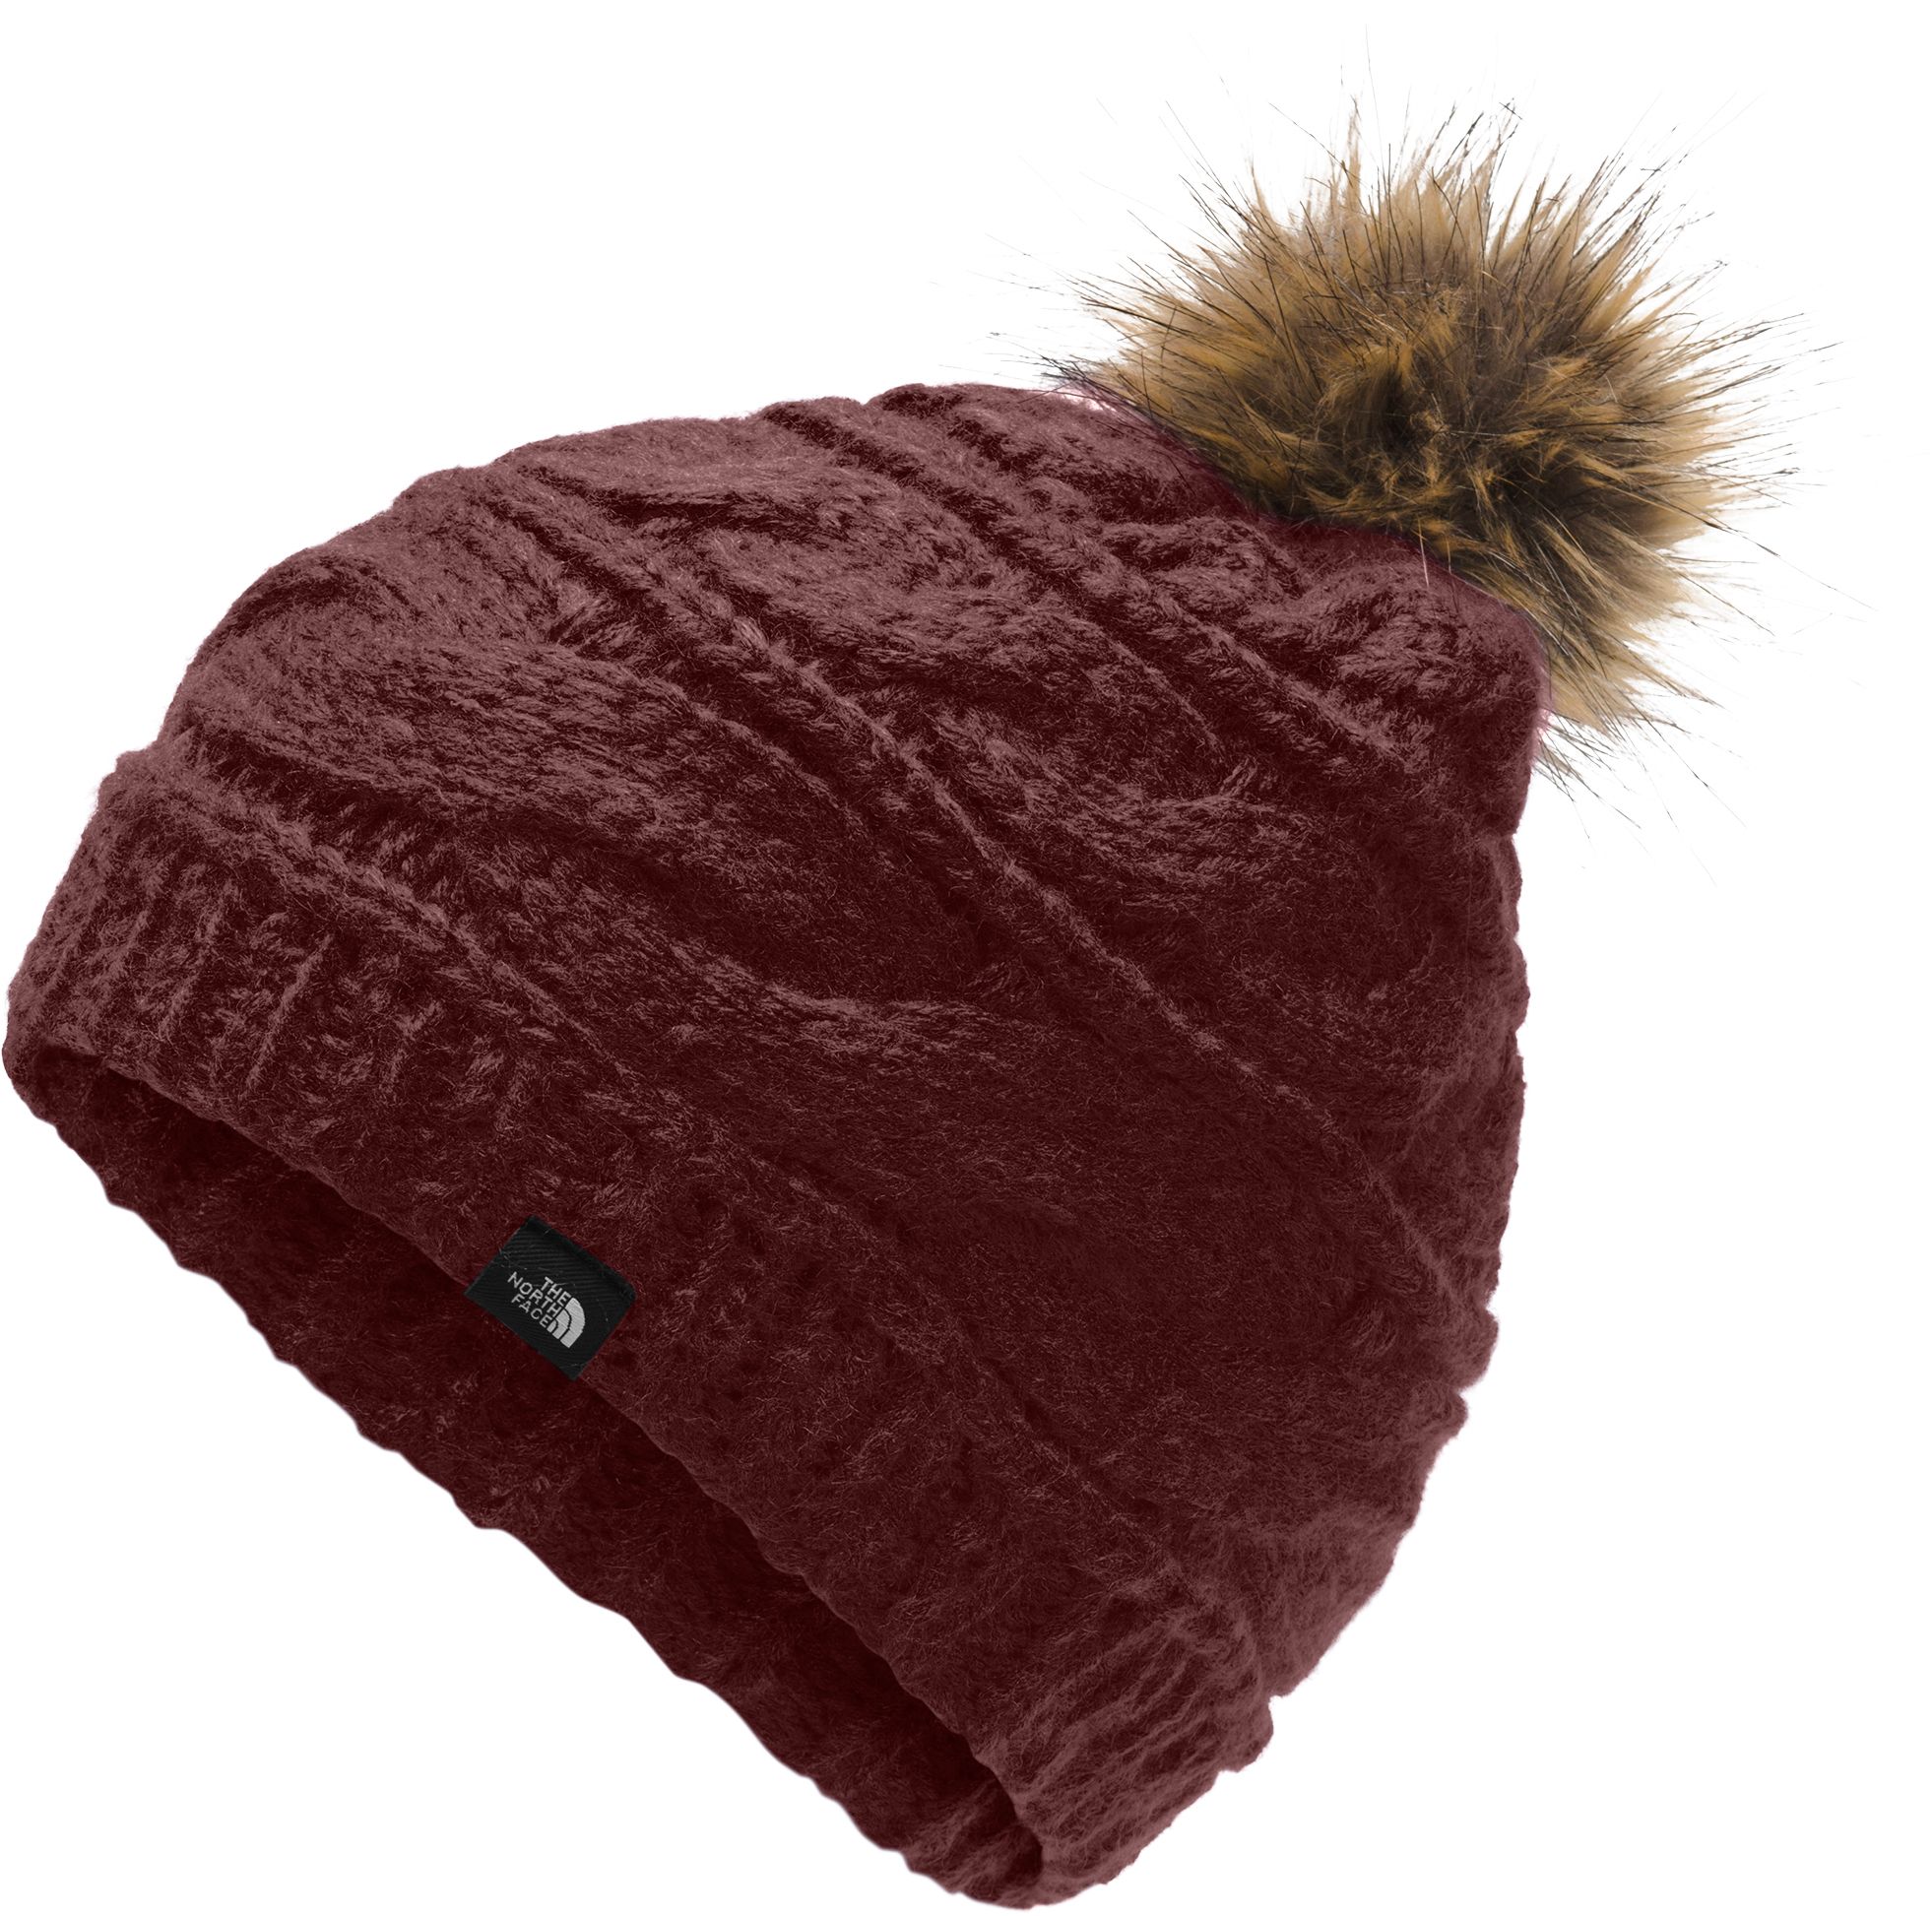 north face cable knit hat